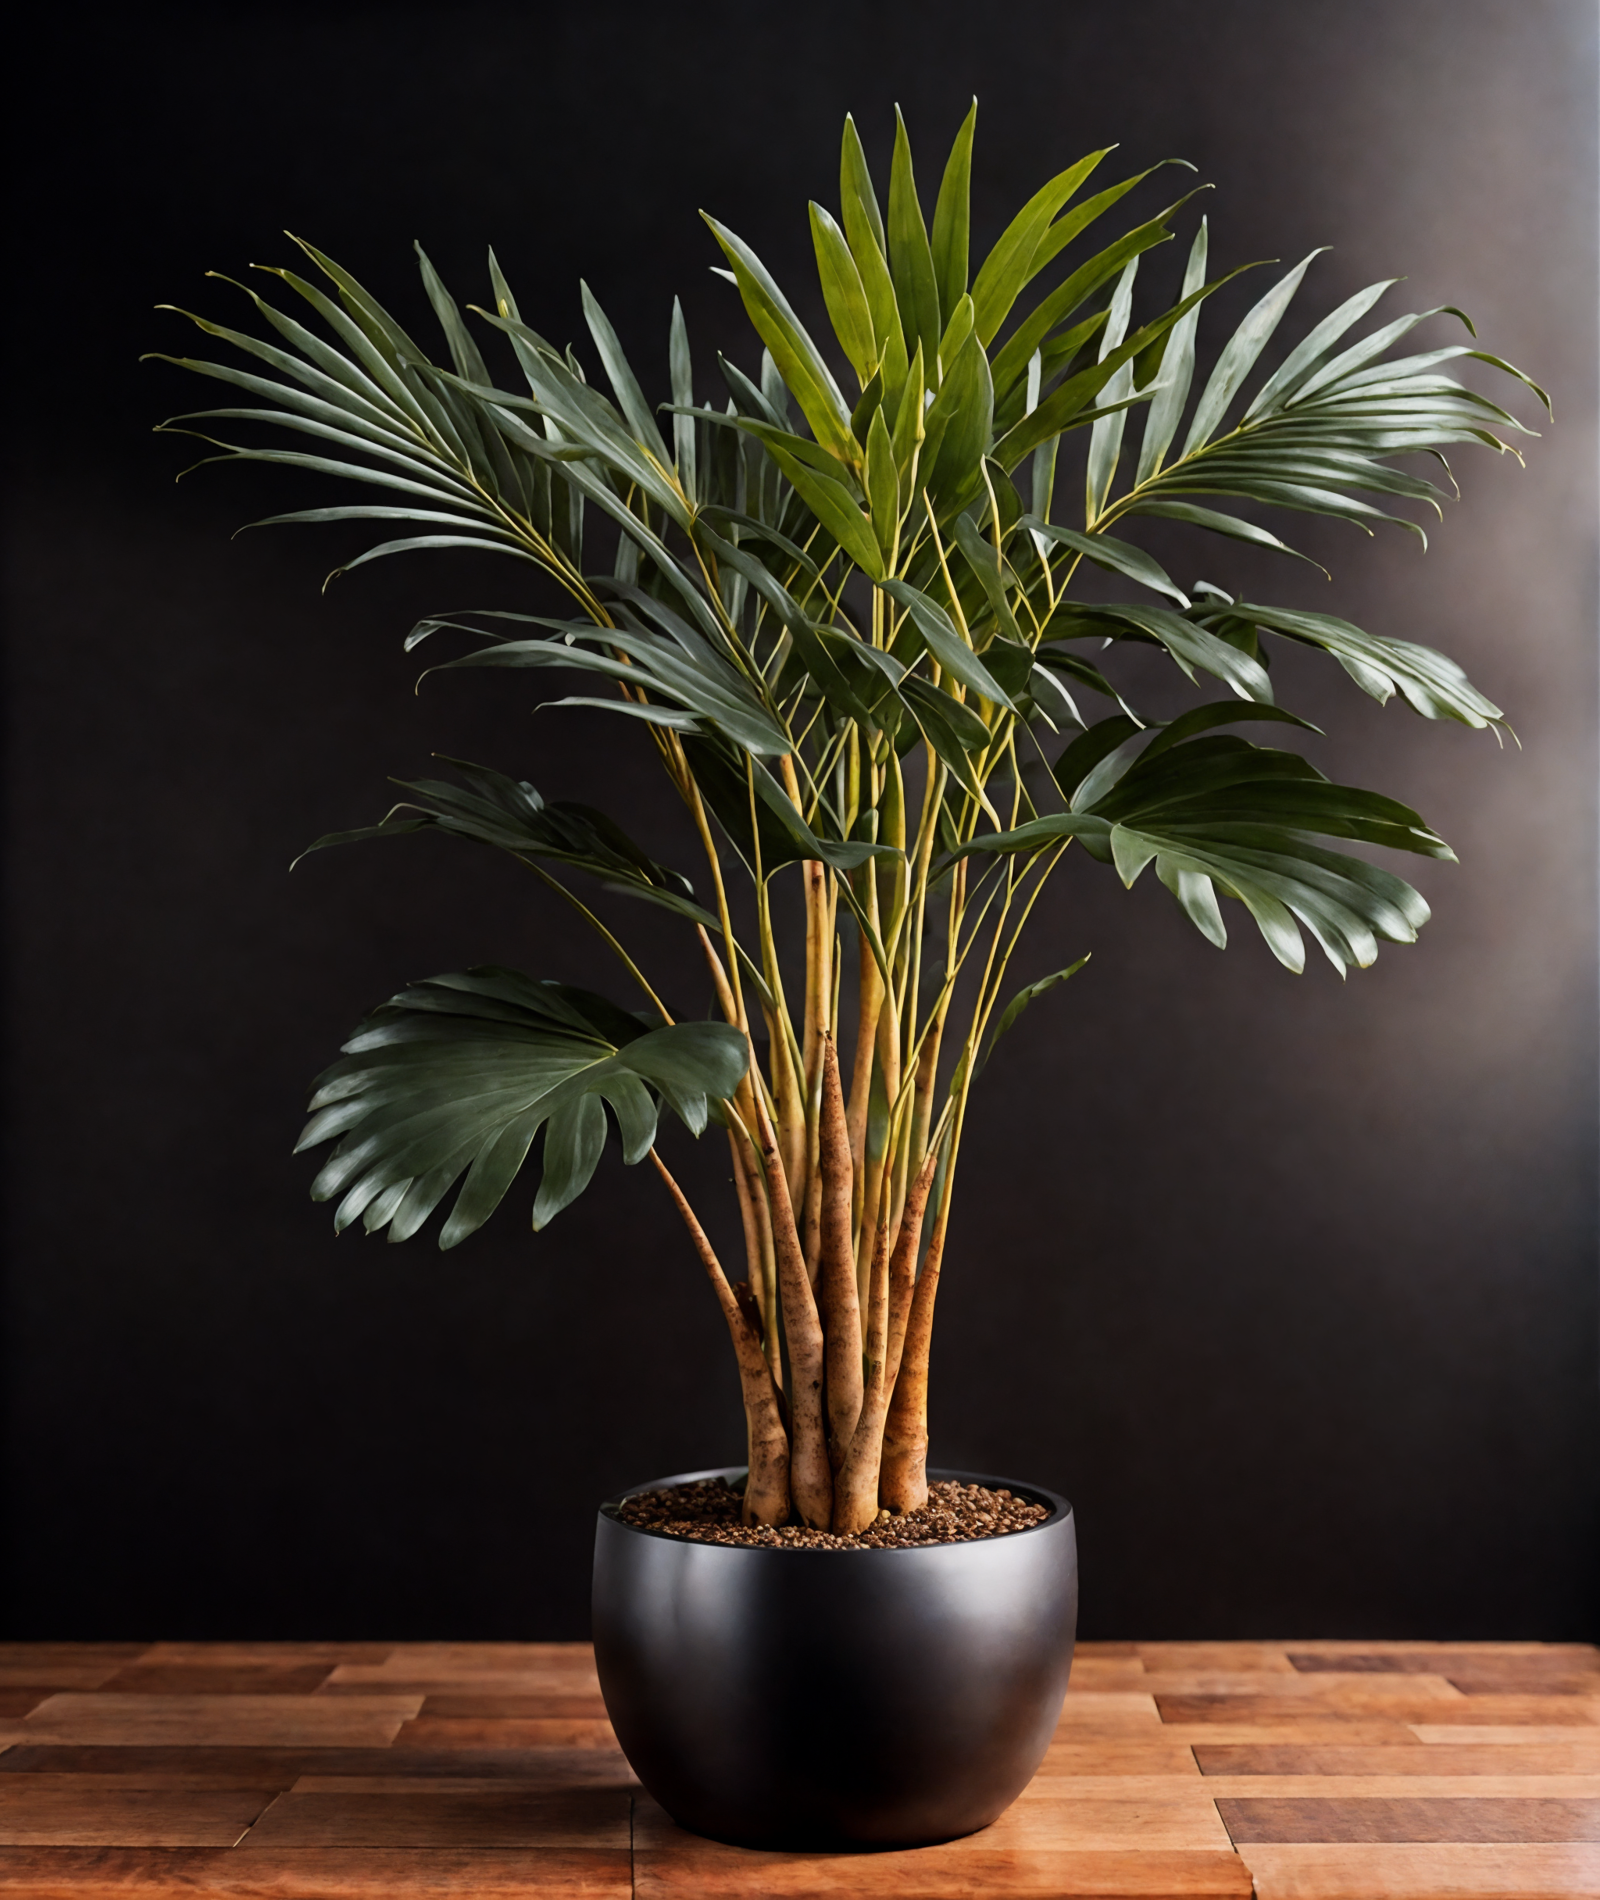 Howea forsteriana in a brown vase on a wooden table, with clear lighting and a dark background.